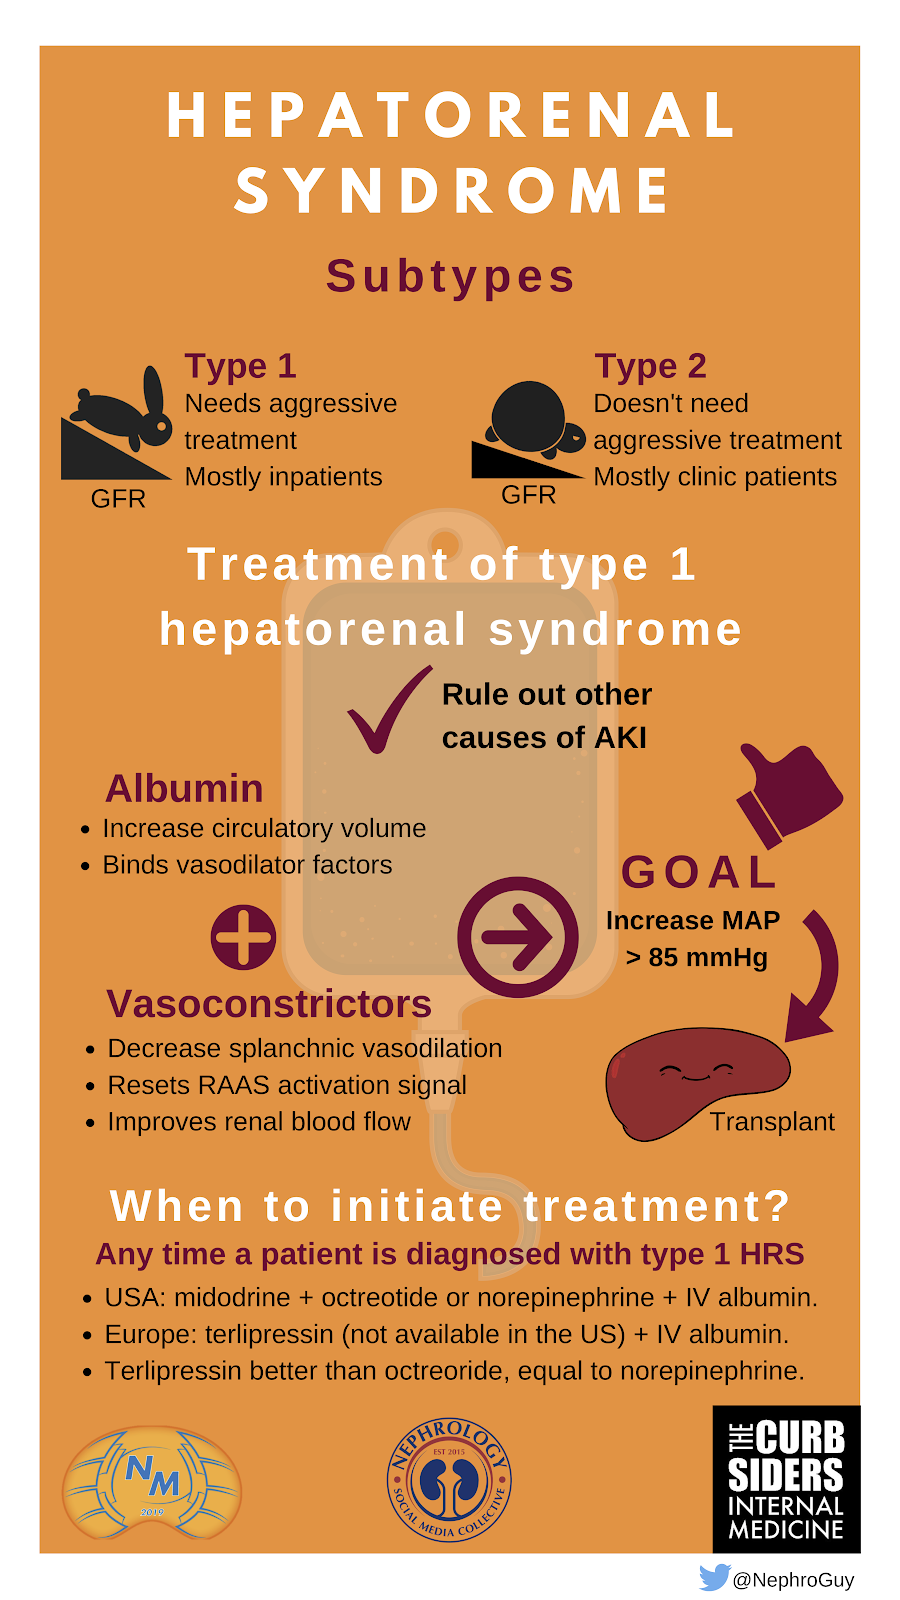 Infographic - Episode summary of hepatorenal syndrome by @NephroGuy